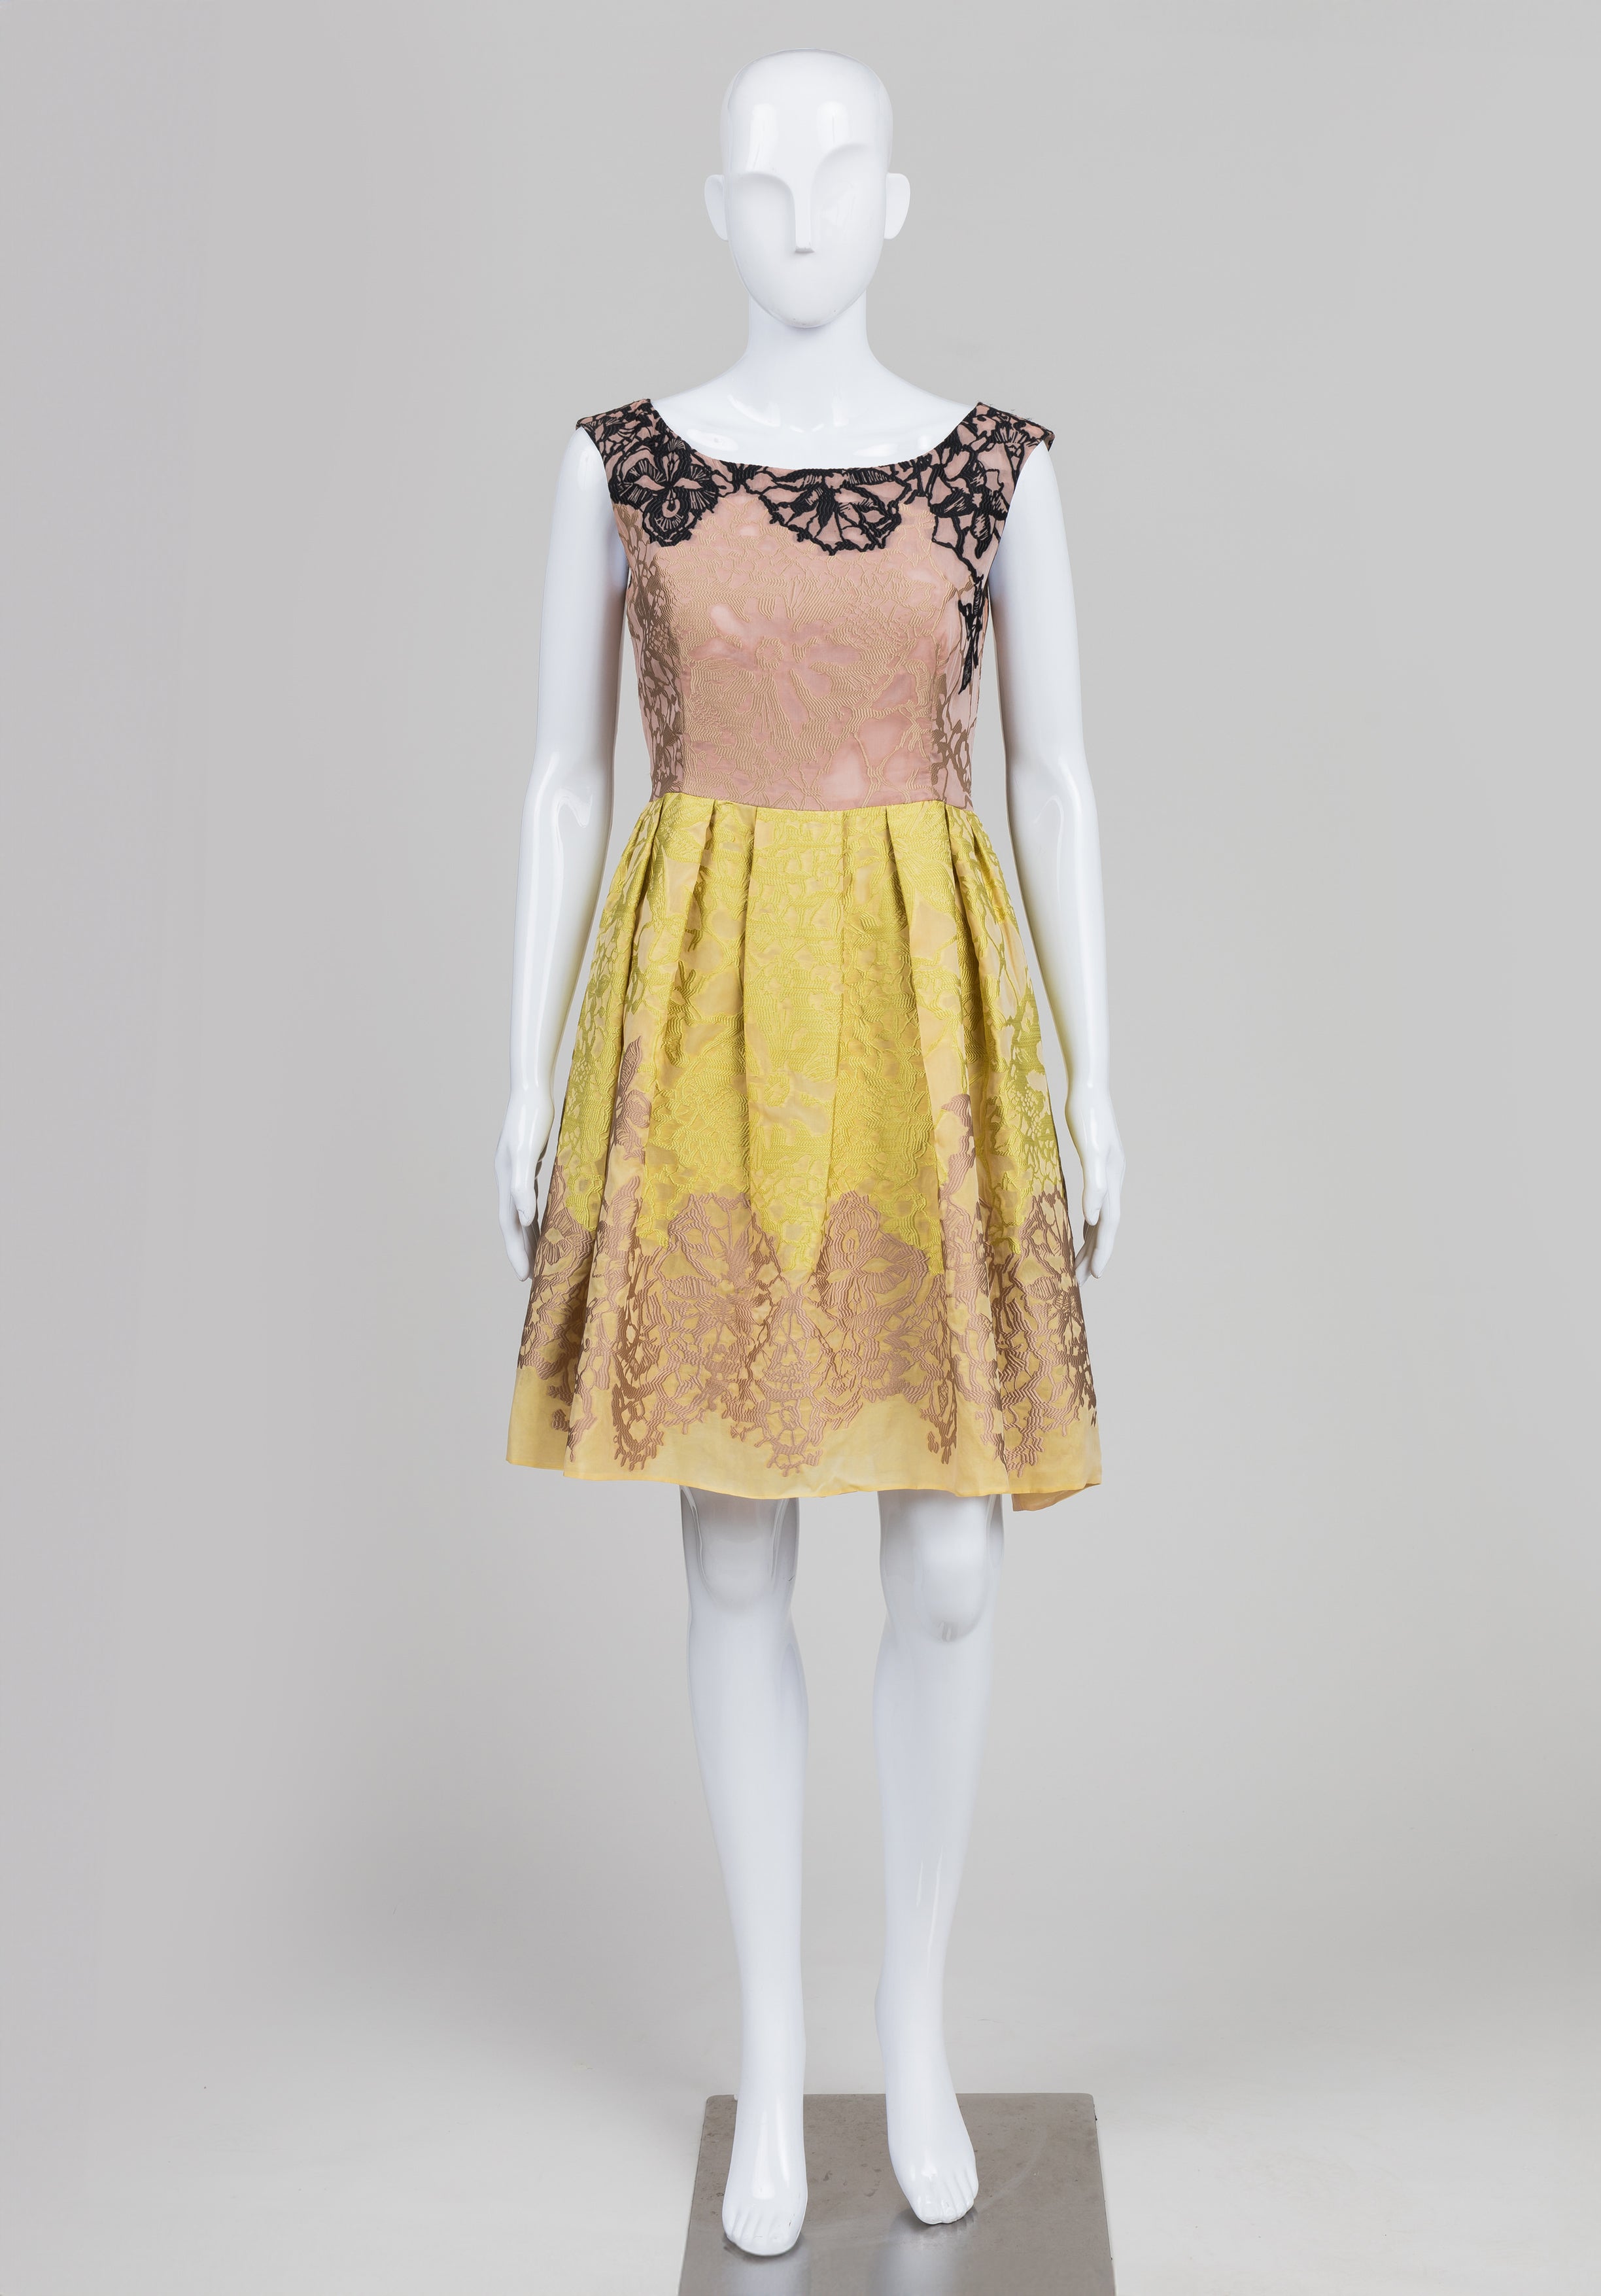 Valentino Taupe/Citron Brocade Fit & Flare Dress w/ Black Embroidery